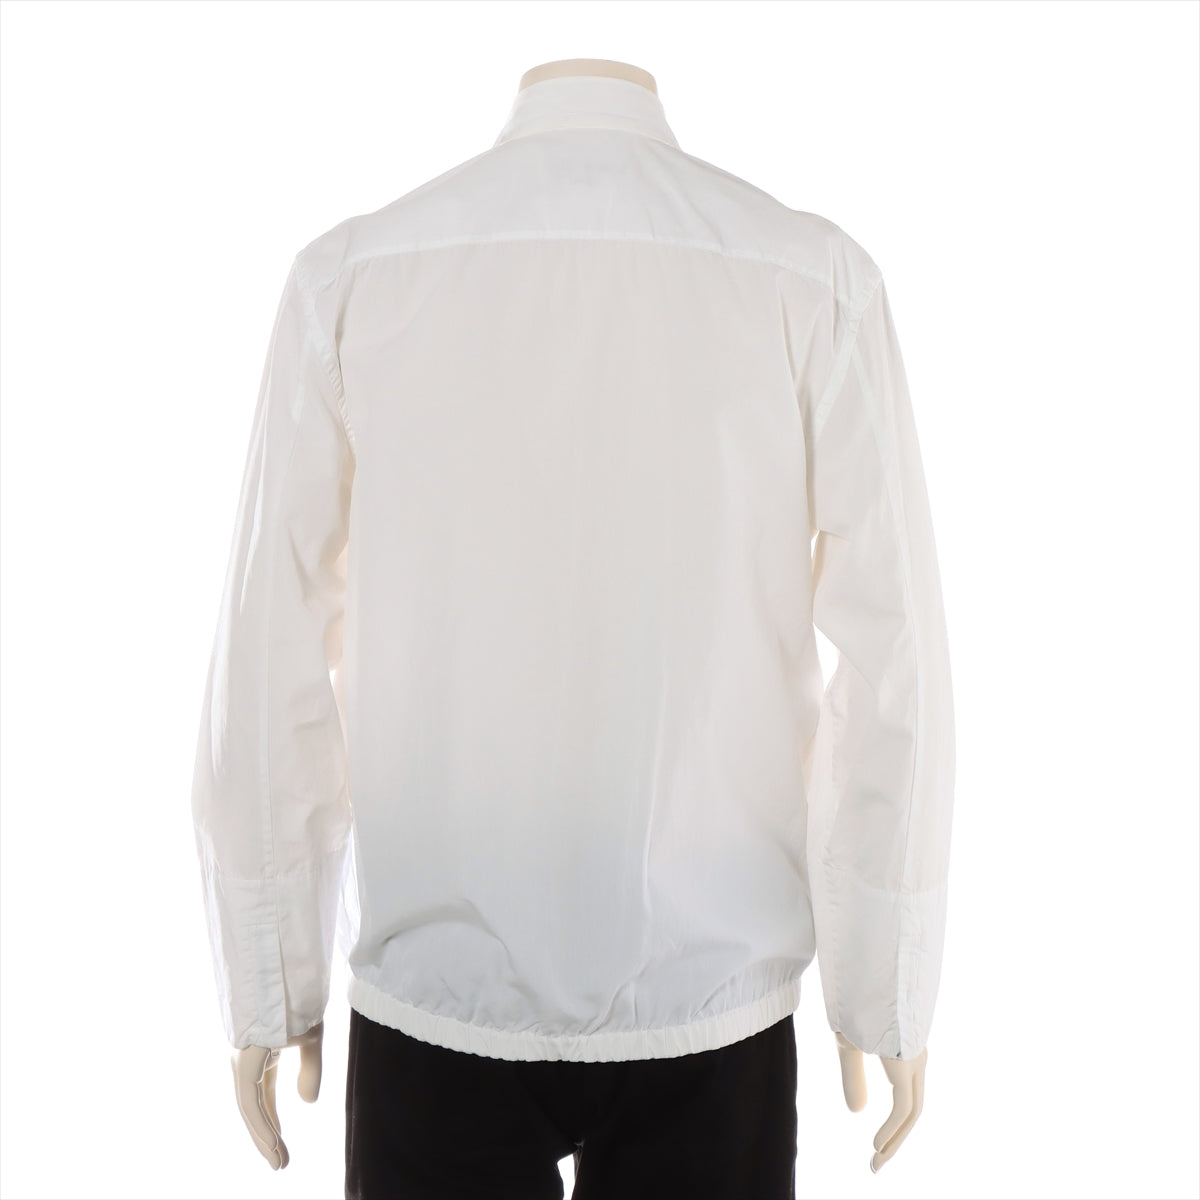 Marni 17AW Cotton Jacket 44 Men's White  M05DL0087 There is a B stamp